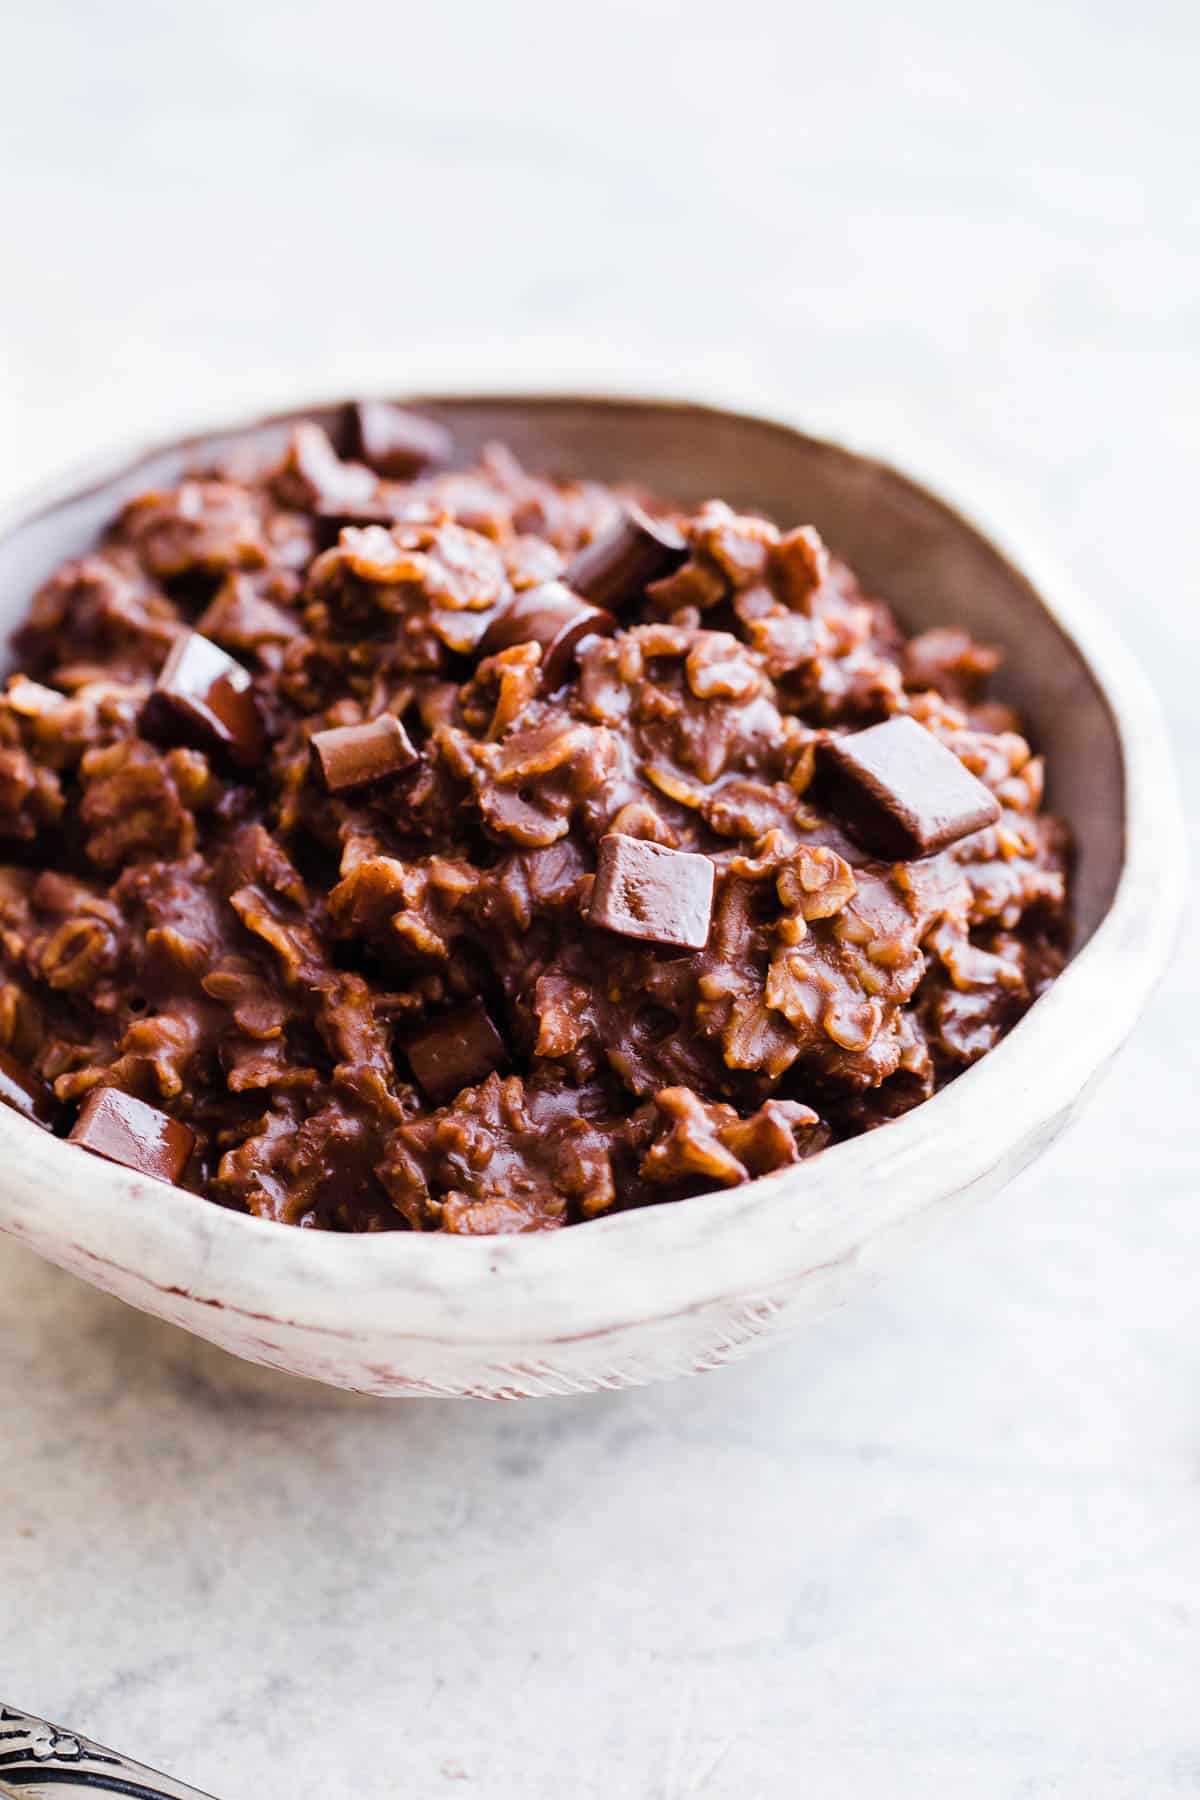 A bowl of chocolate oatmeal with melted chocolate chunks on top.